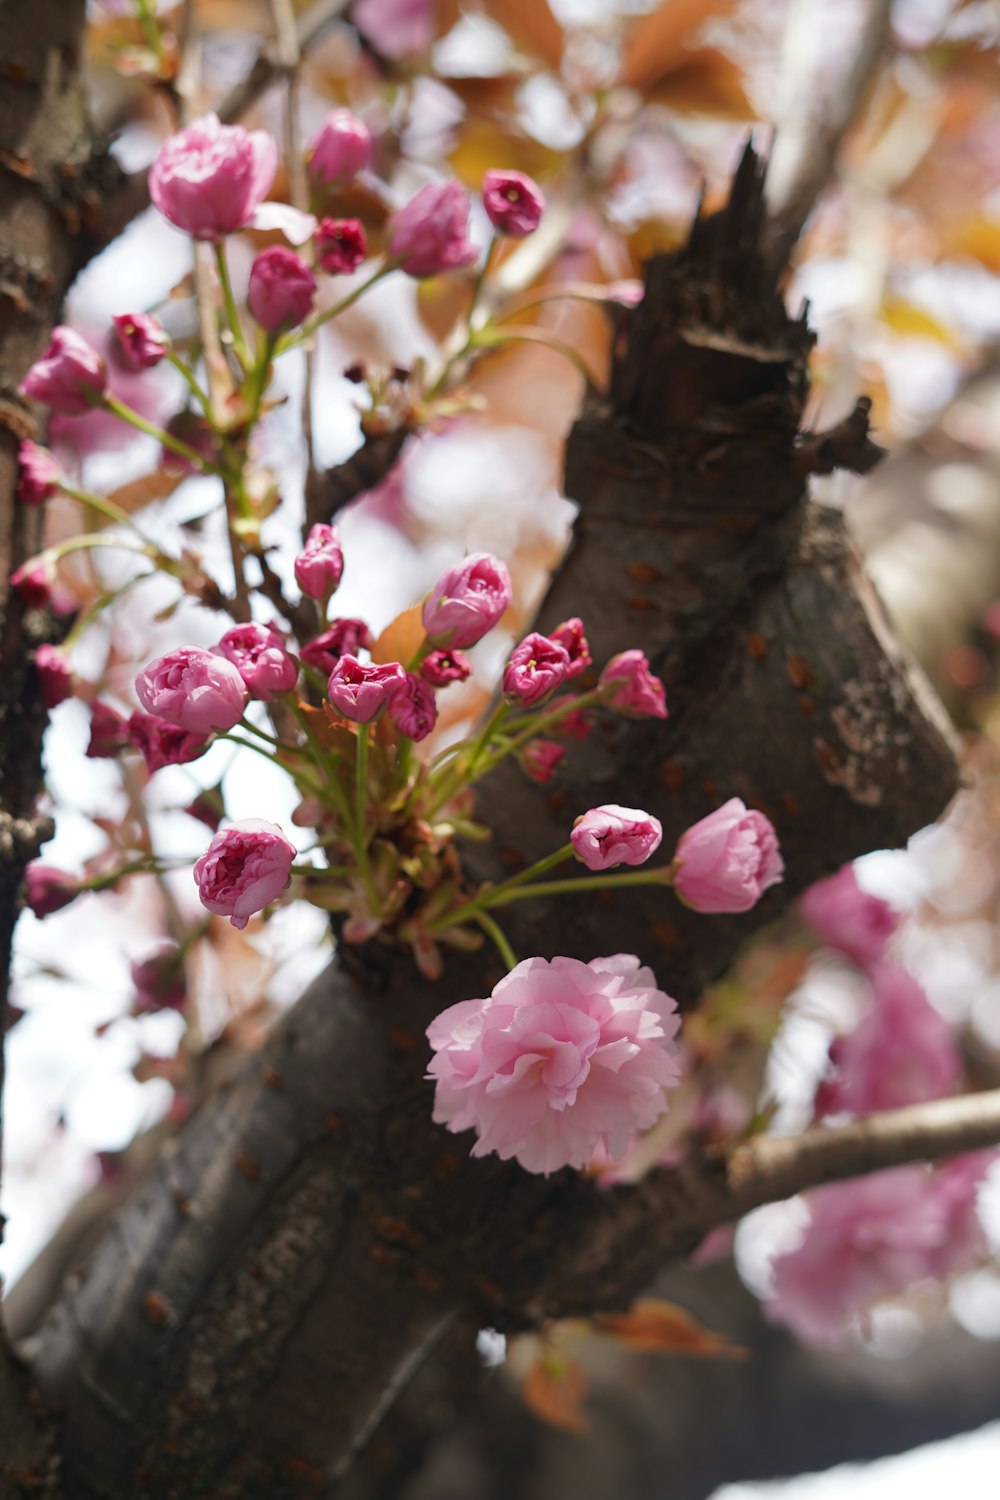 pink flowers are growing on a tree branch